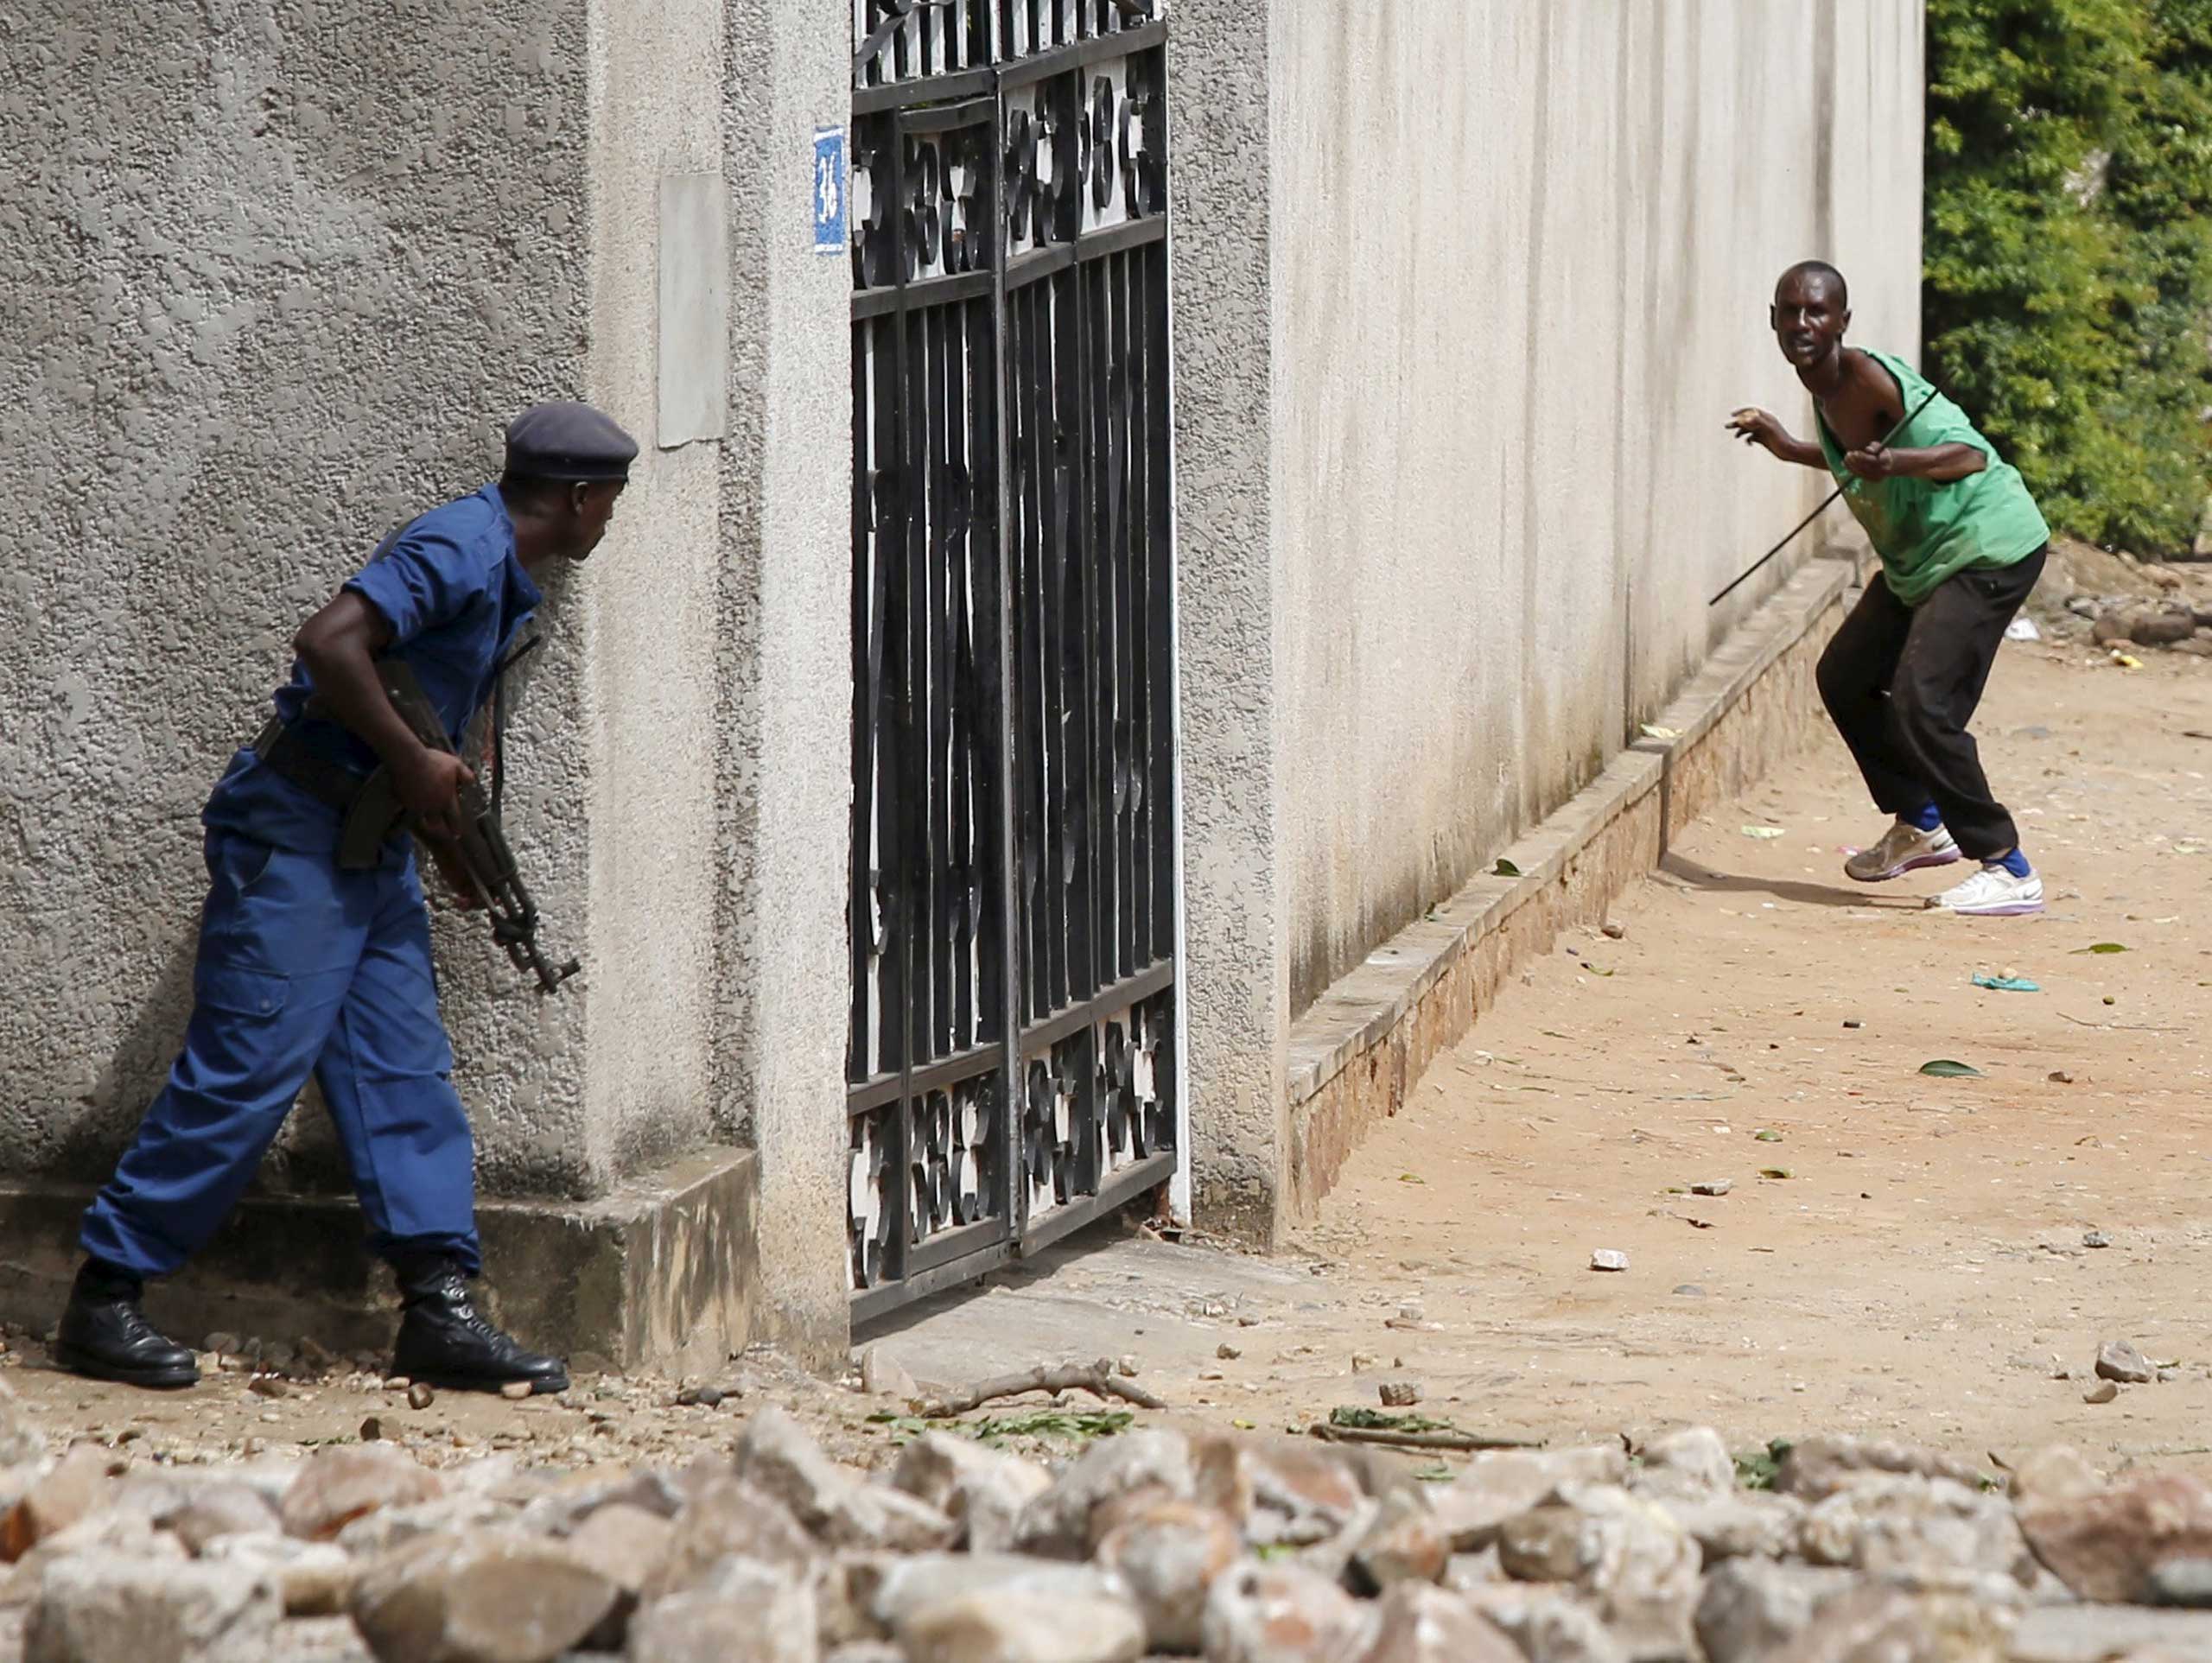 Policemen clash with protesters near a parliament building during a protest against President Pierre Nkurunziza's decision to run for a third term in Bujumbura, Burundi, on May 13, 2015.